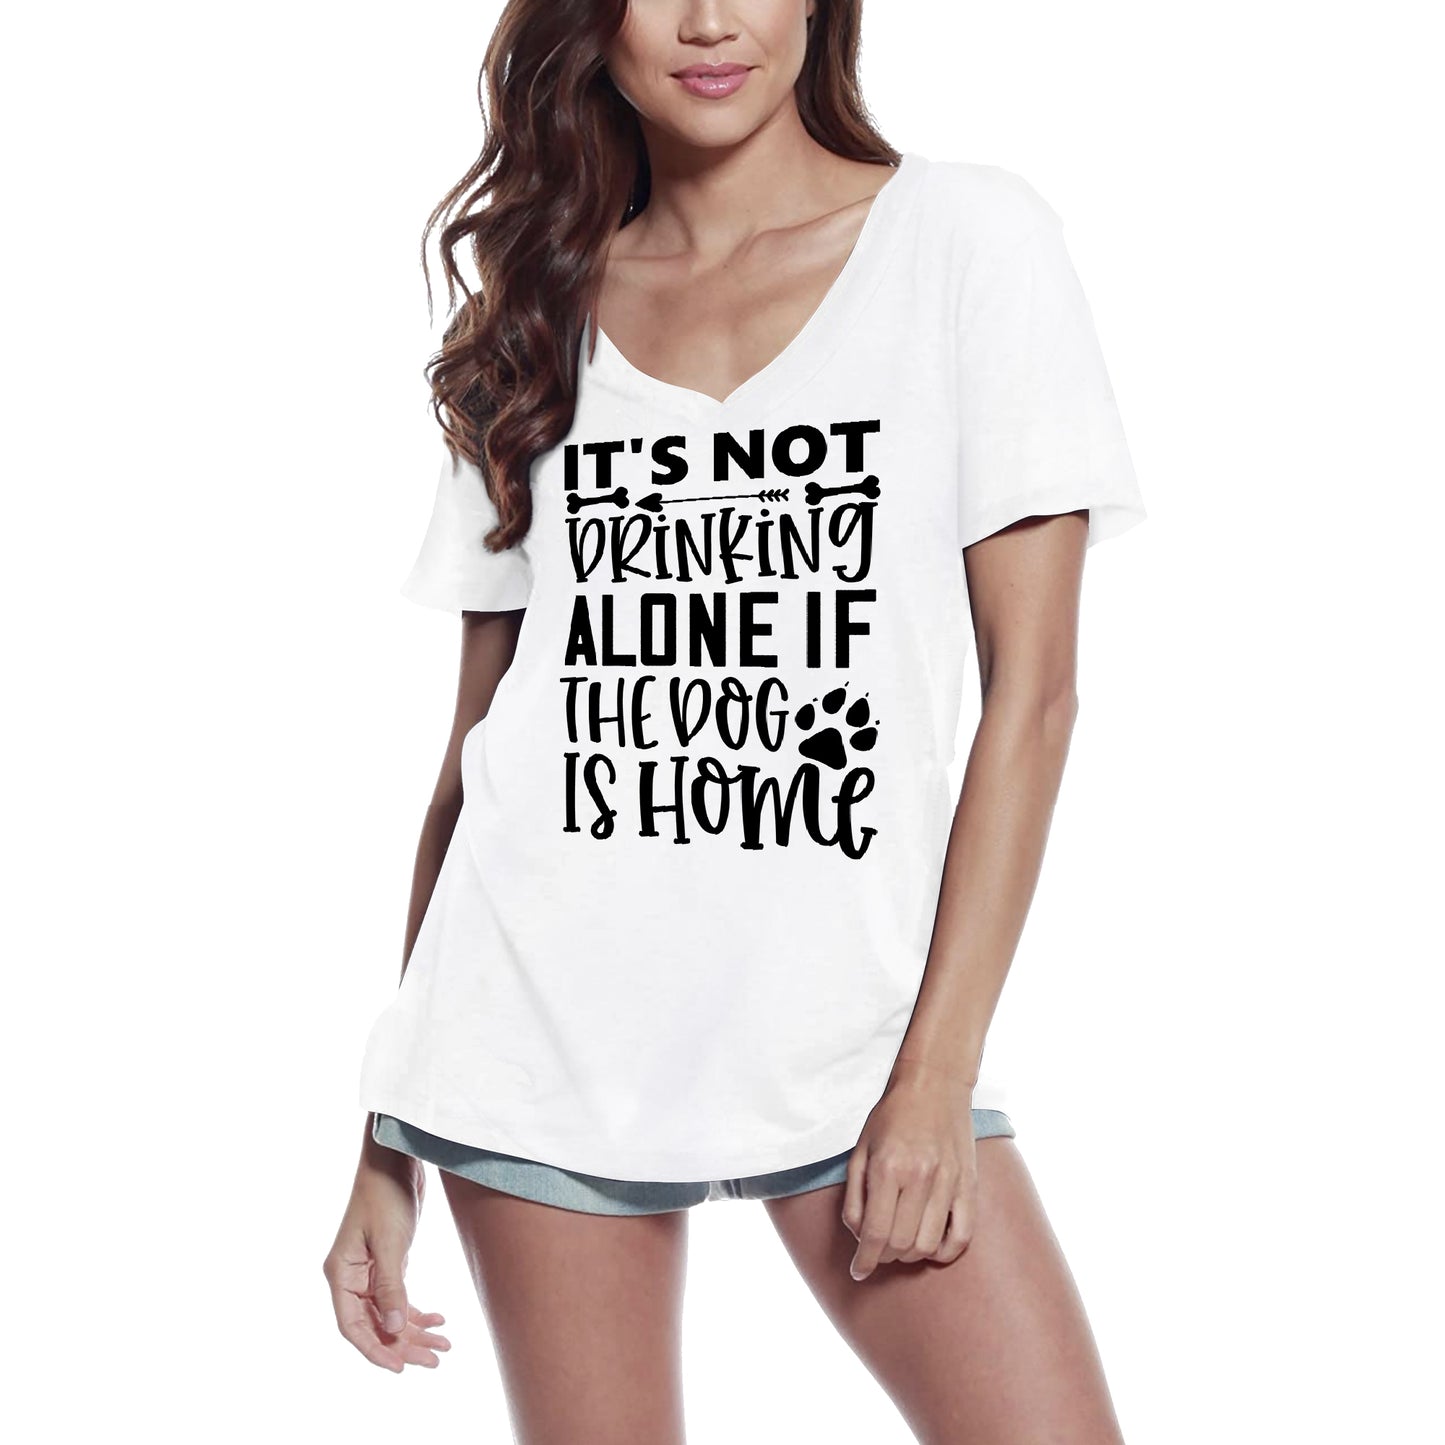 ULTRABASIC Women's T-Shirt It's Not Drinking Alone If the Dog is Home - Short Sleeve Tee Shirt Tops